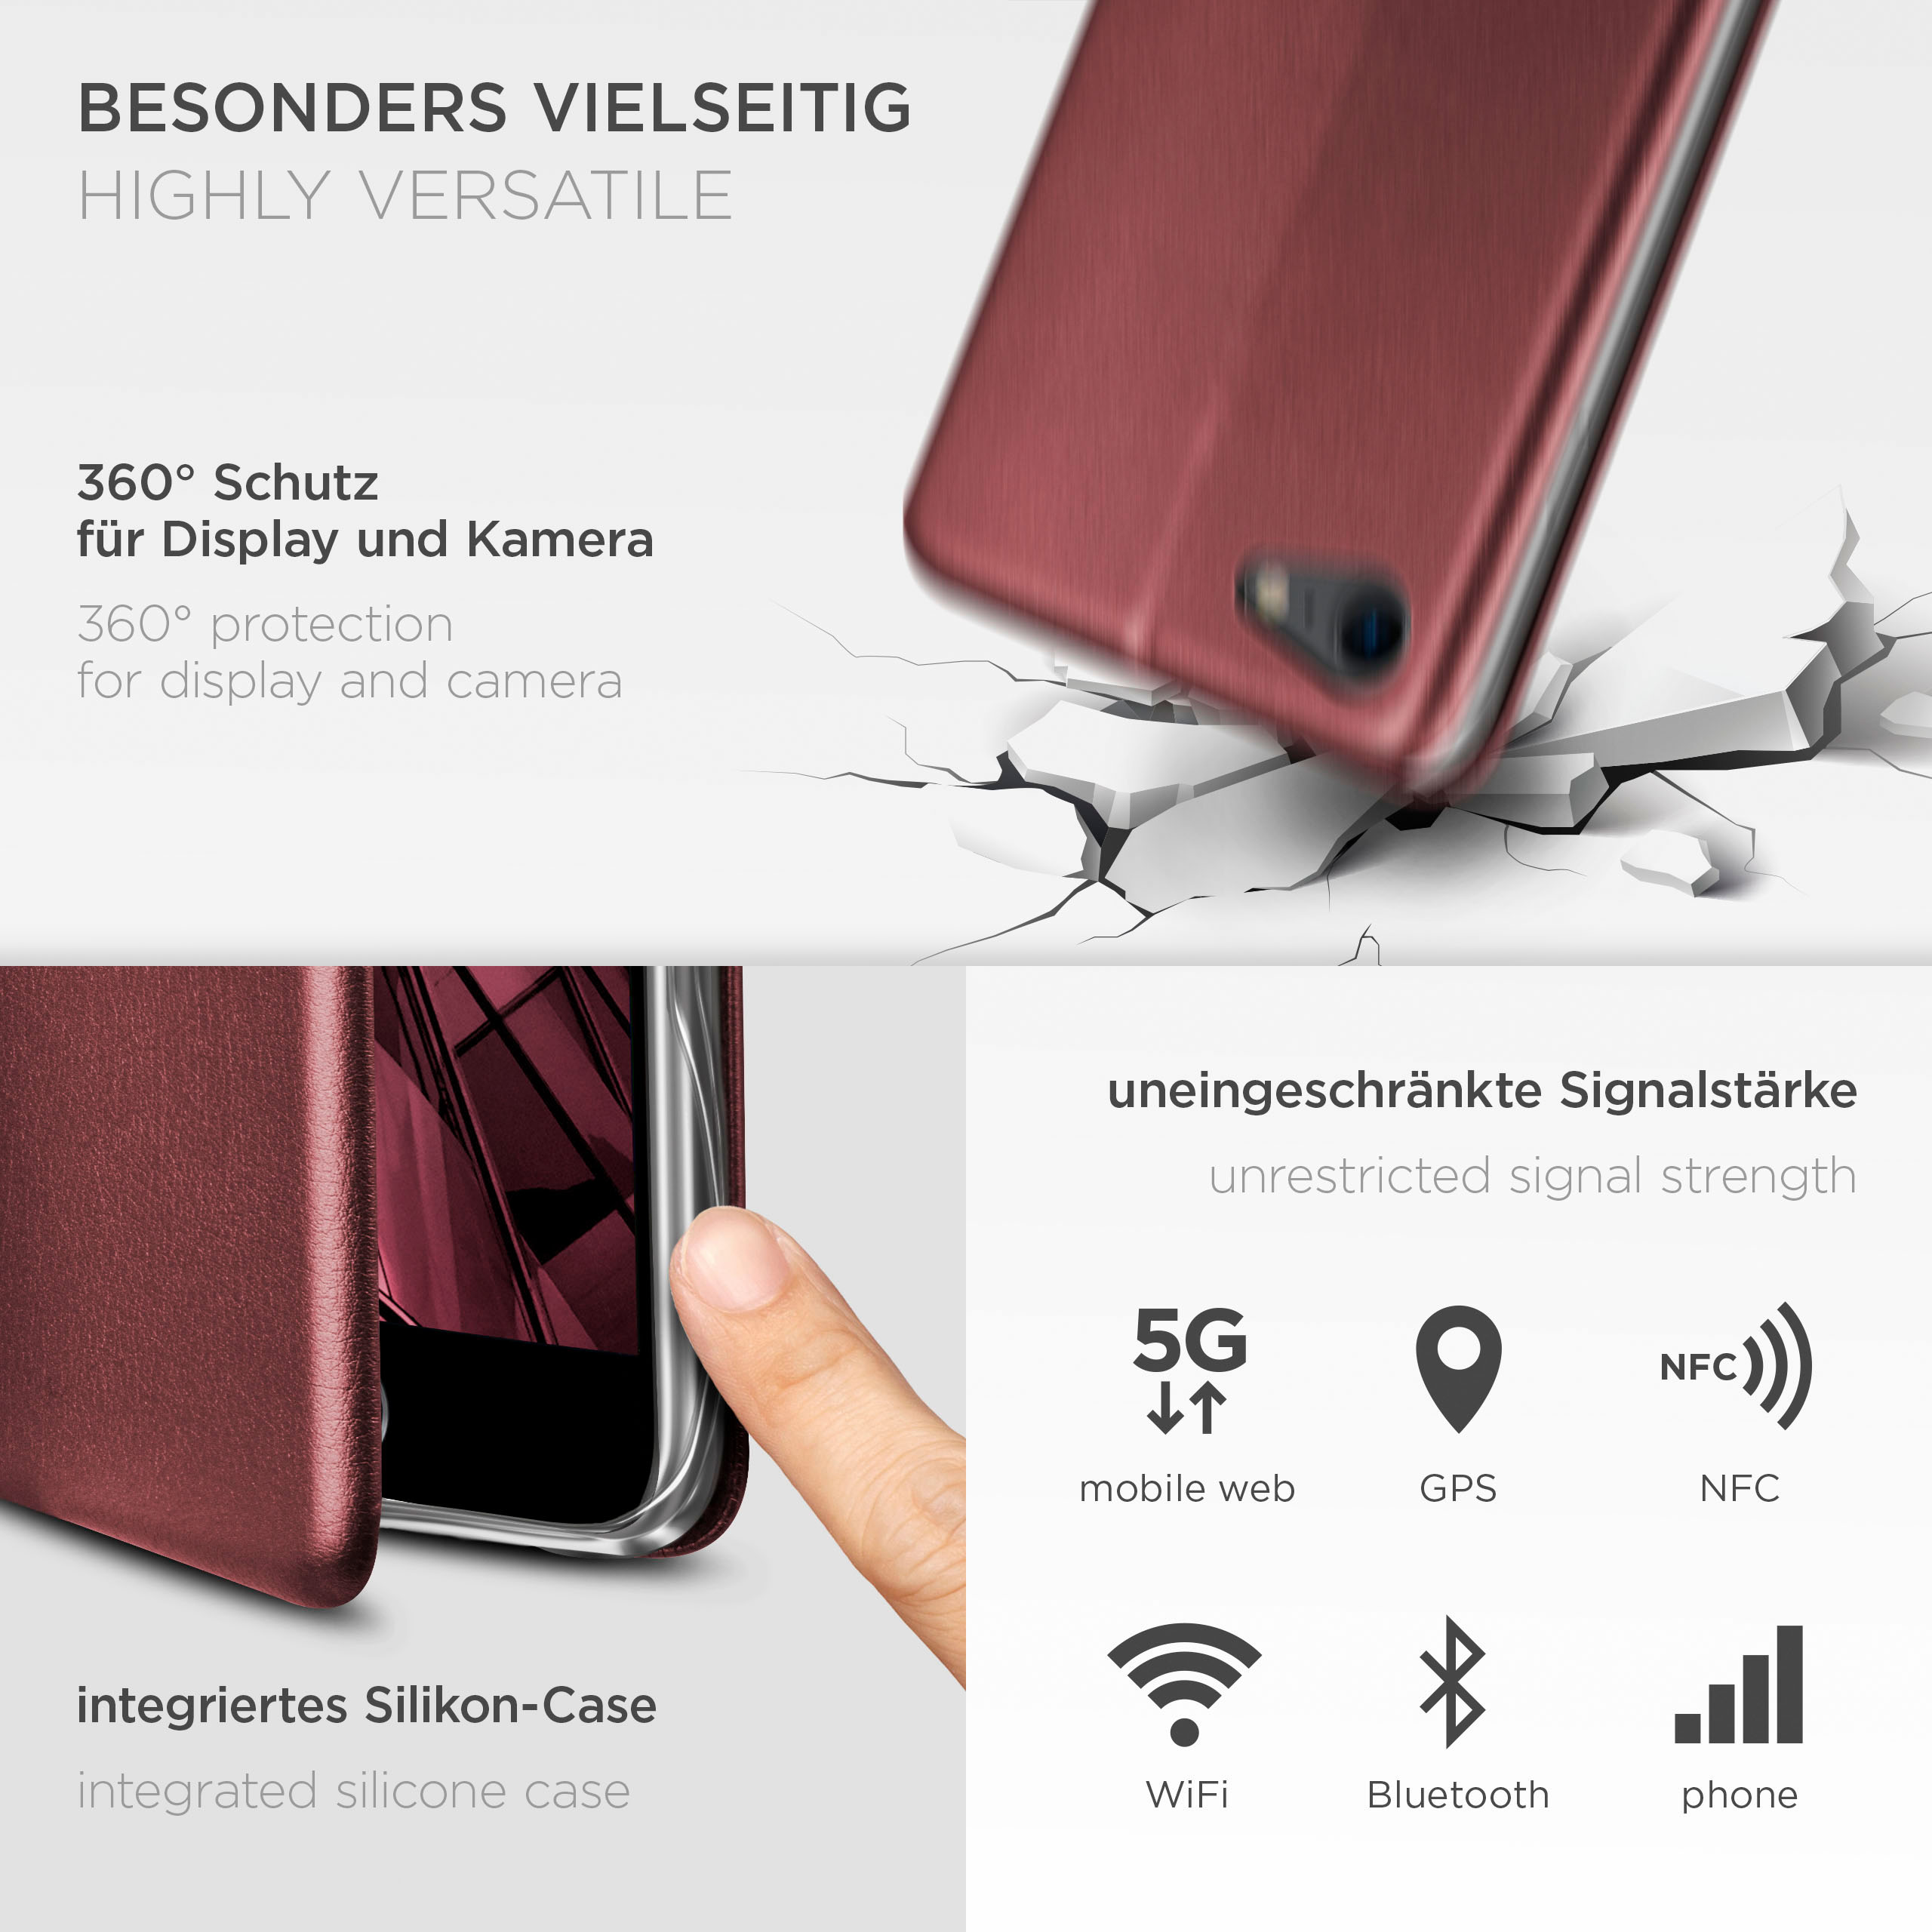 ONEFLOW Business Red Burgund / Case, 8, iPhone Flip Cover, Apple, 7 iPhone 